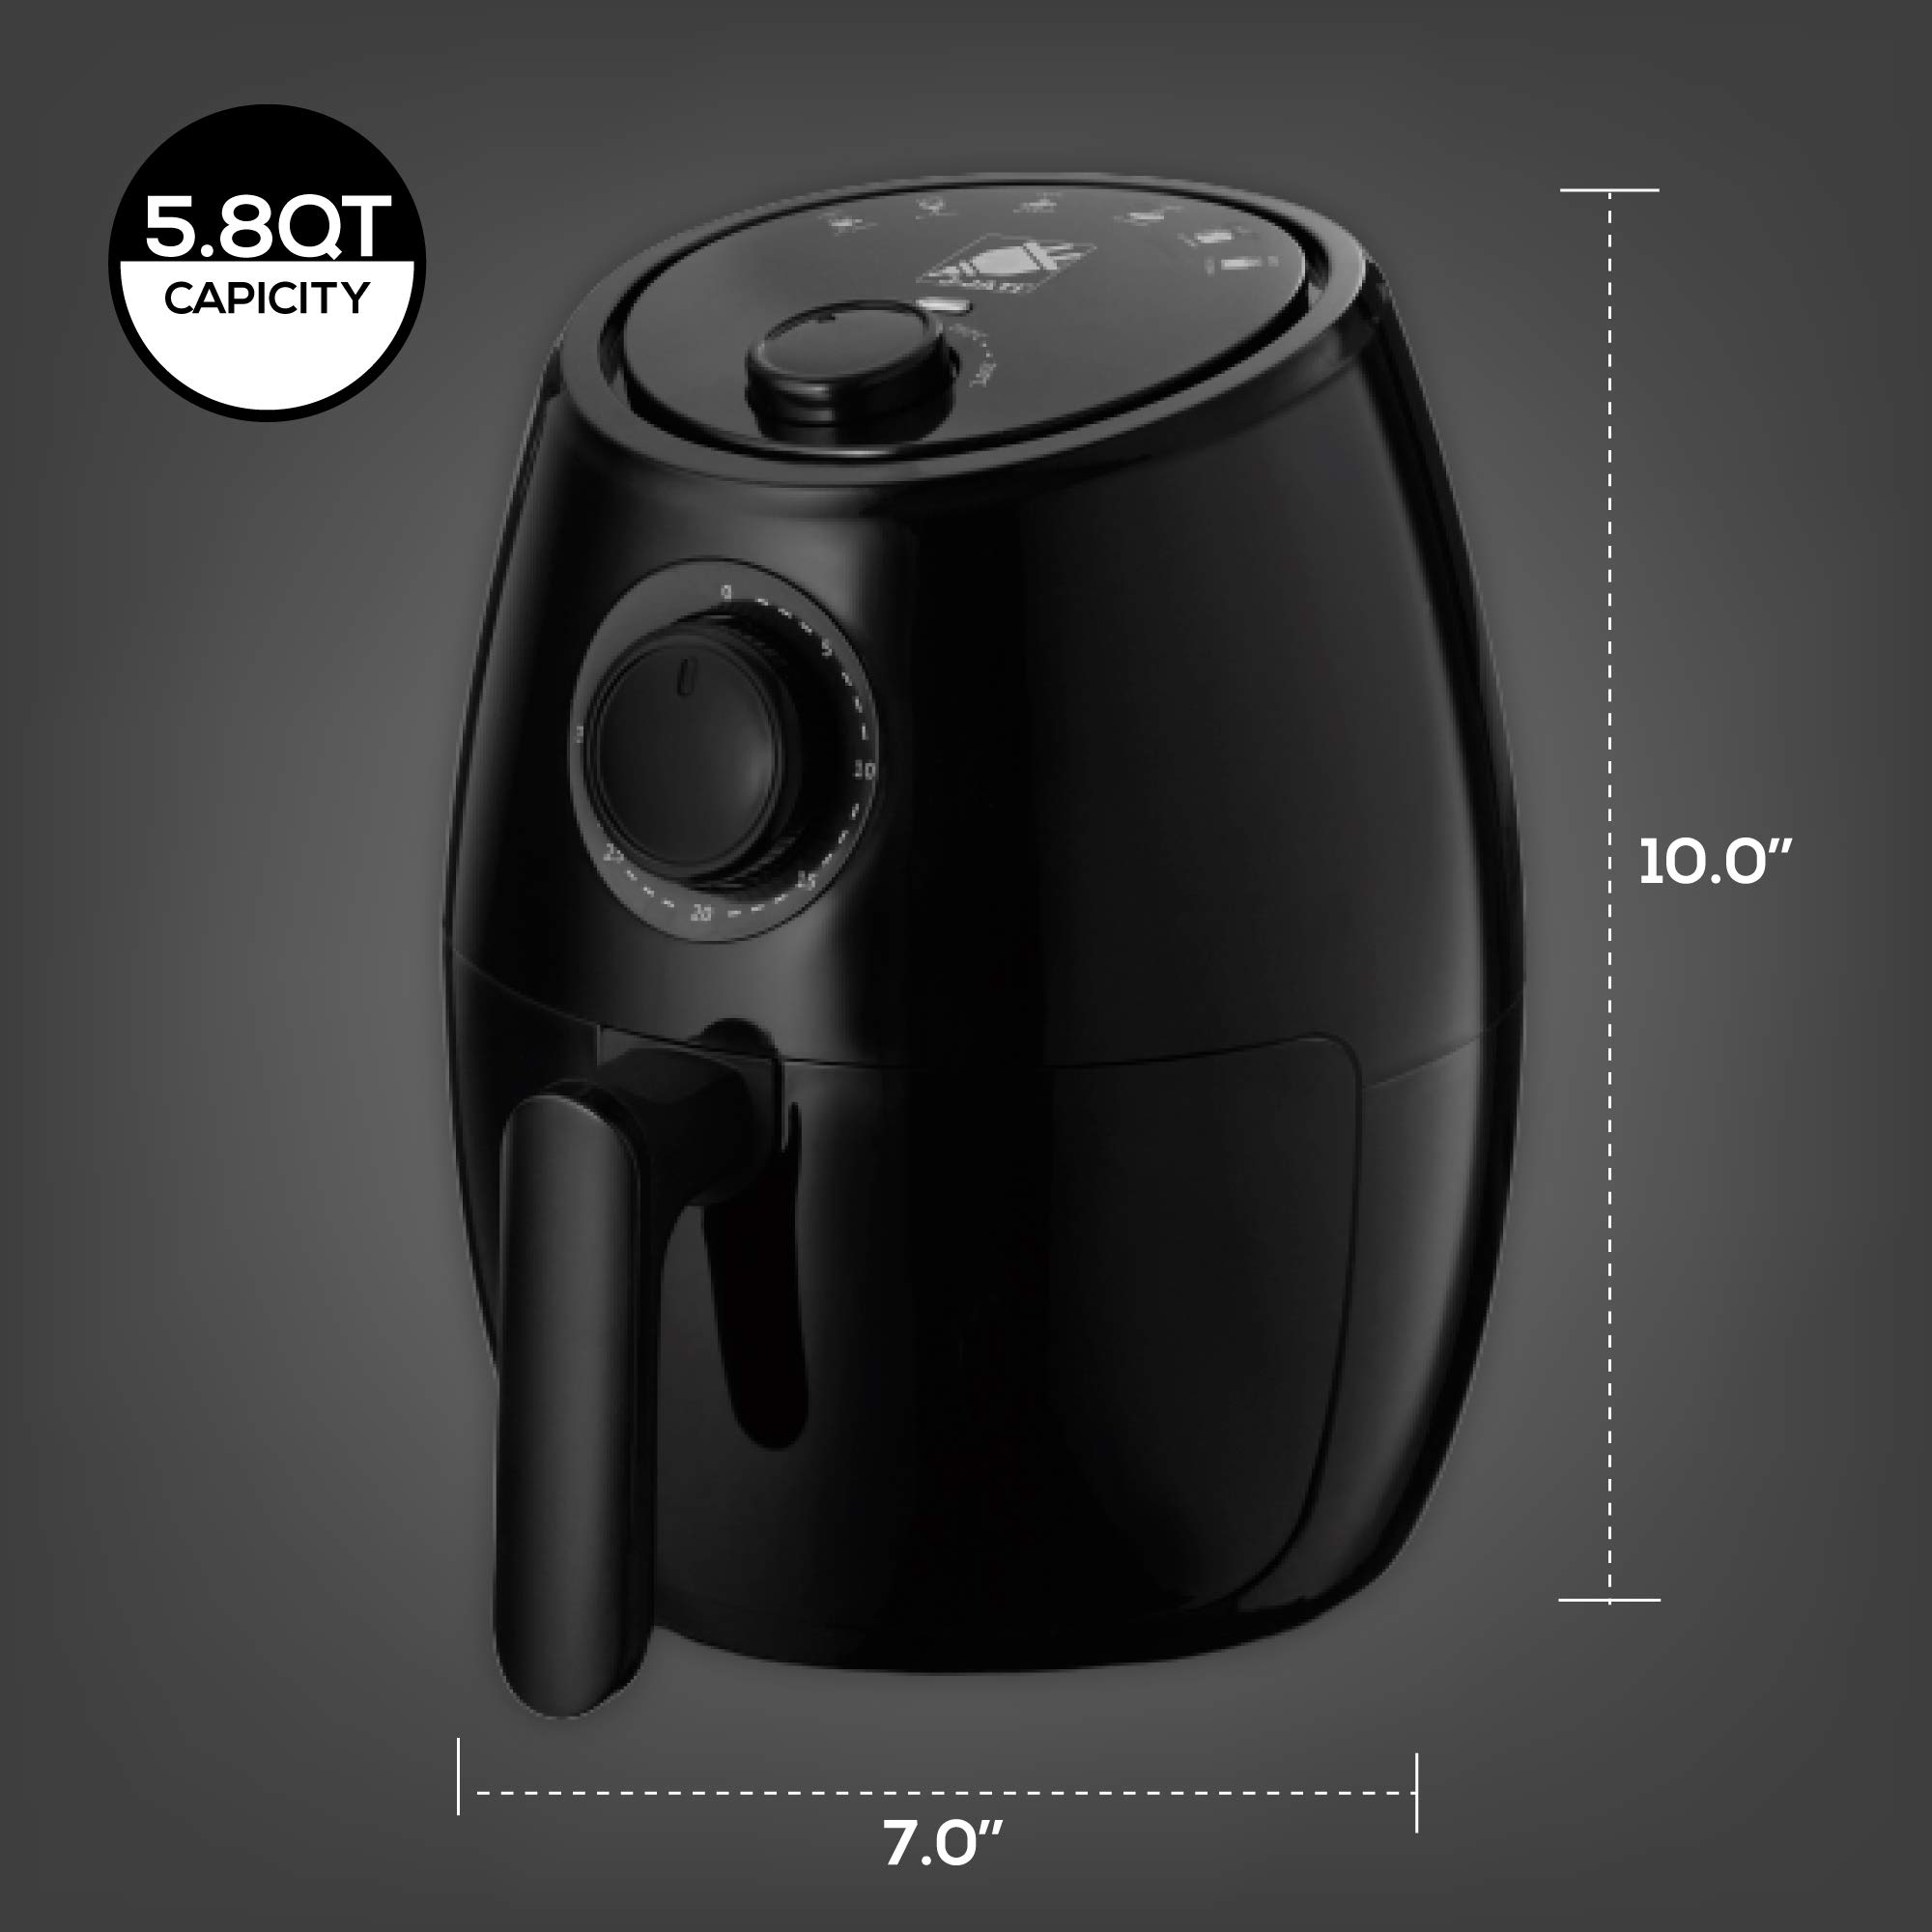 J-Jati Air Fryer Cool Touch Housing Dial/Digital Hot Air Healthy Frying Oil-Free AirFryer Auto Shutoff, Dishwasher safe parts, Space Saving Black (2.0L)